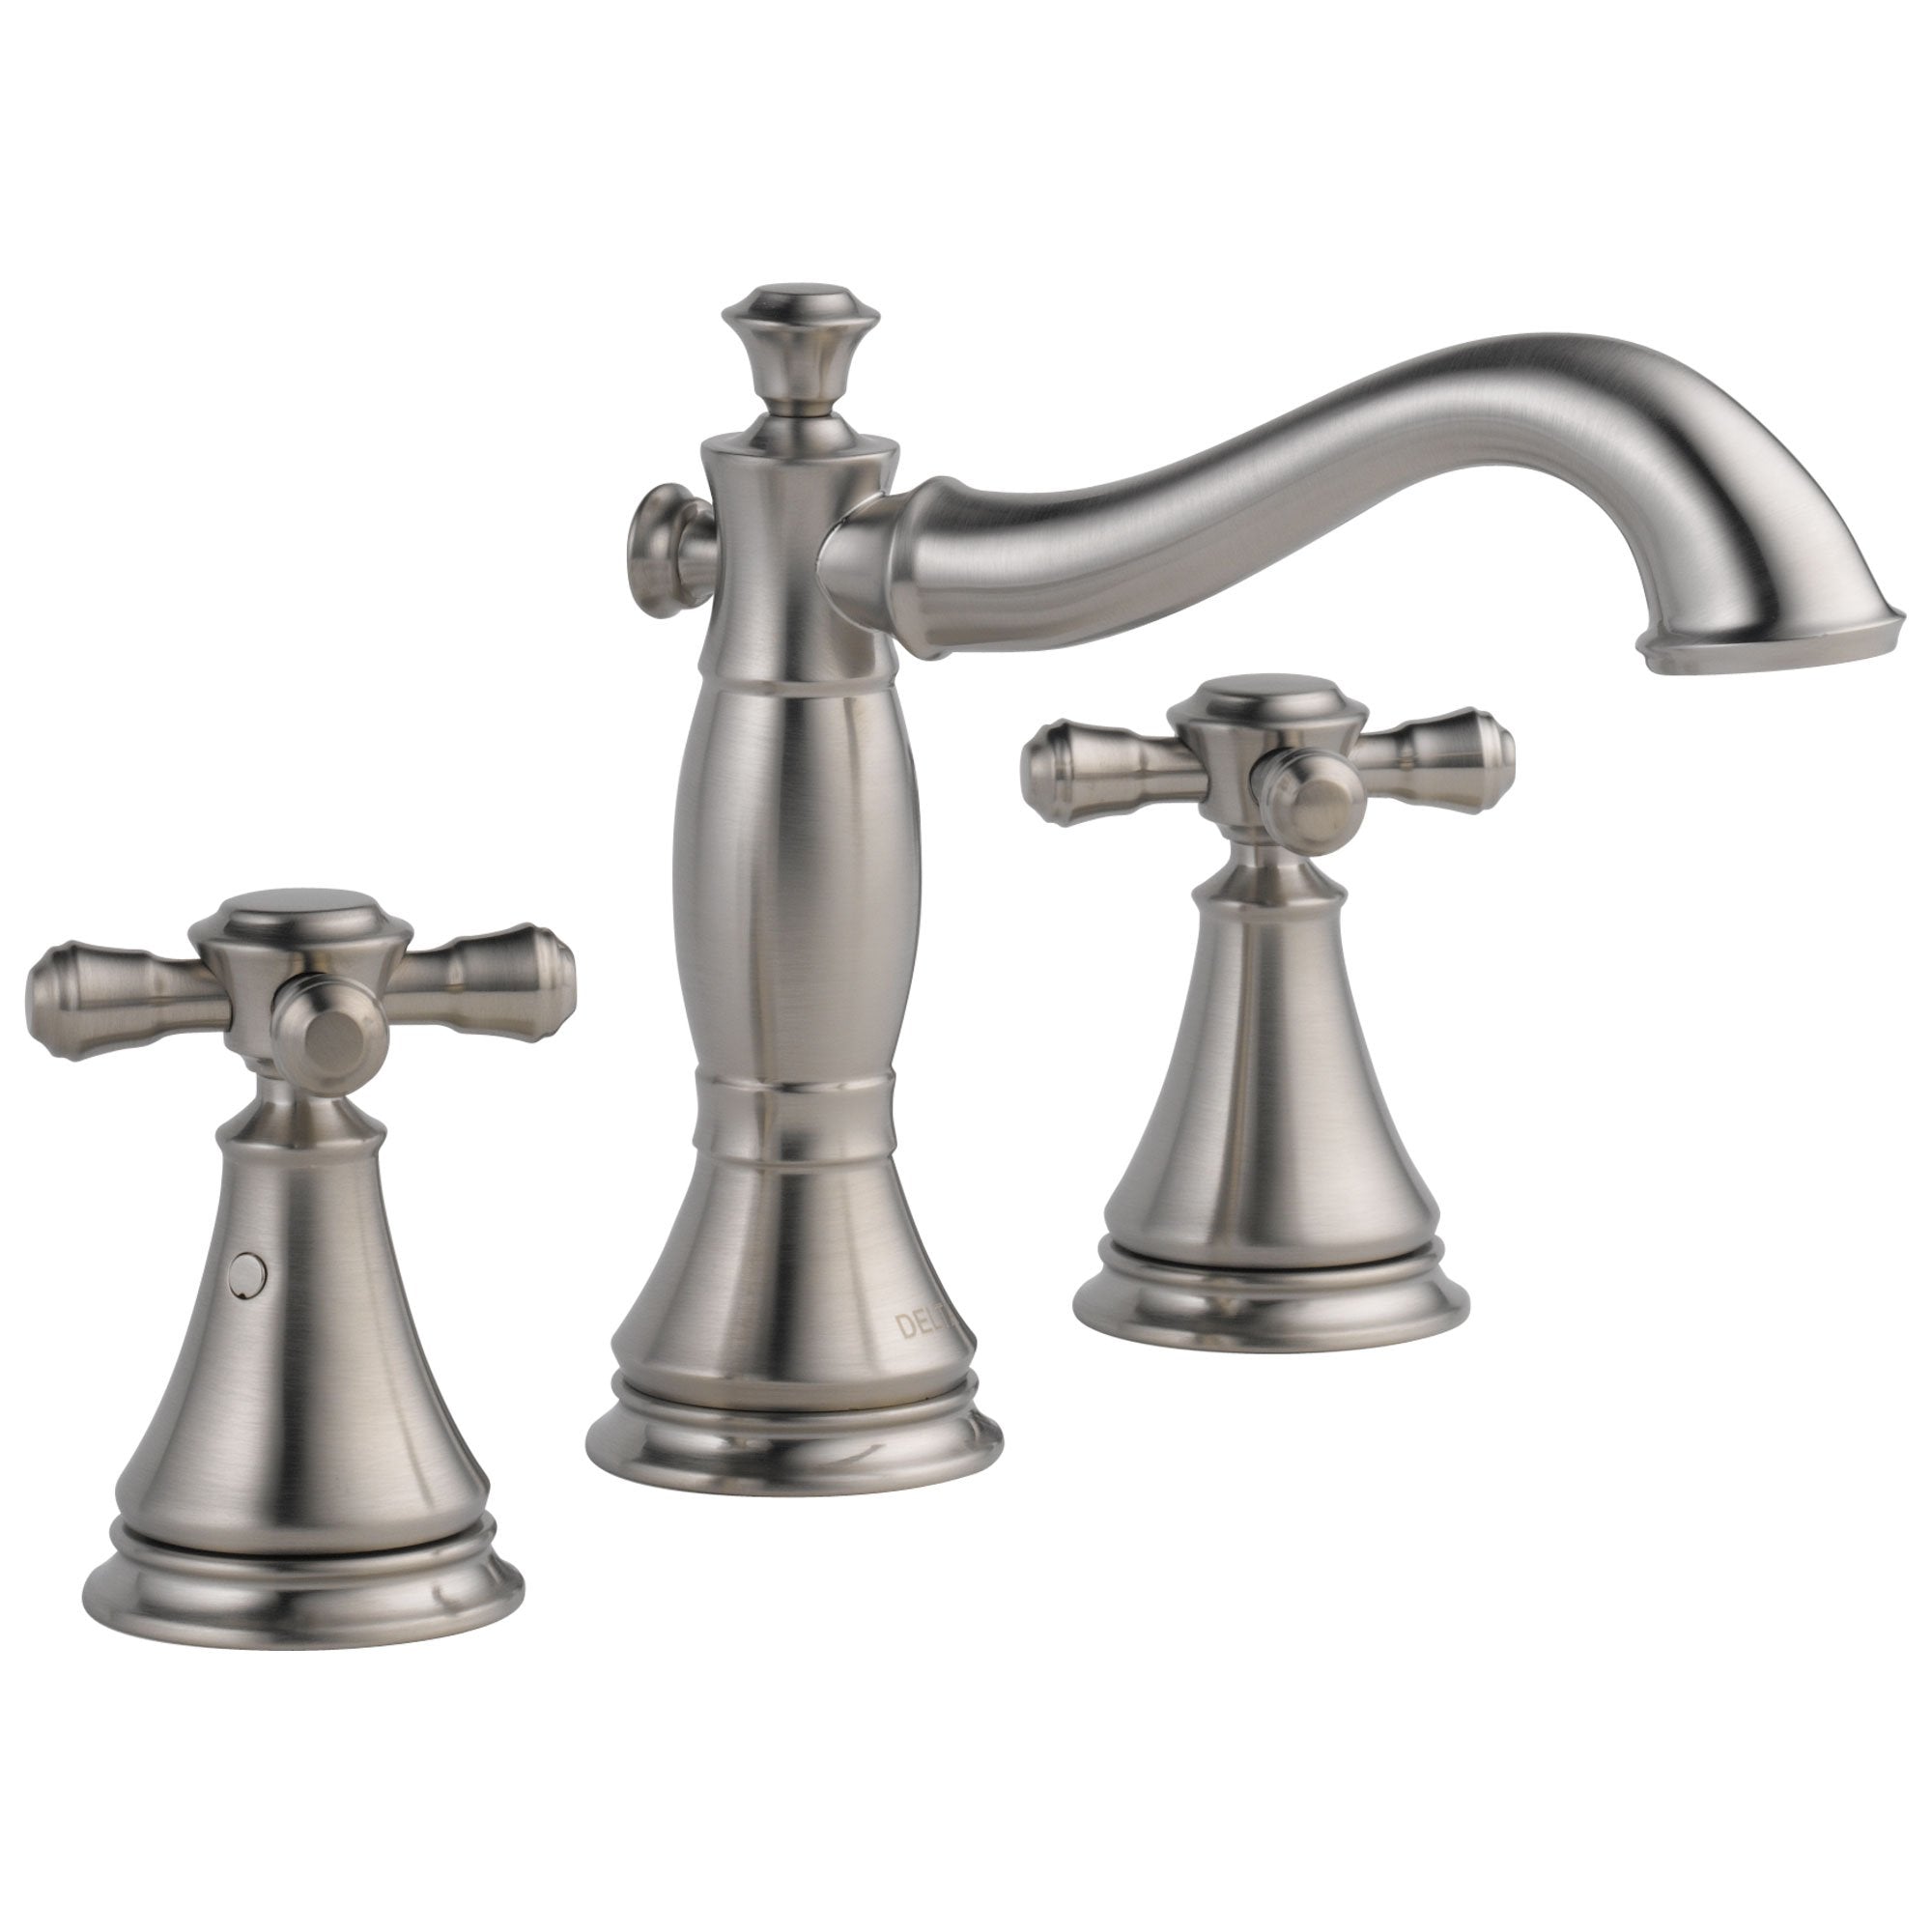 Delta Cassidy Collection Stainless Steel Finish Widespread Lavatory Bathroom Sink Faucet INCLUDES Two Cross Handles and Metal Pop-Up Drain D1774V